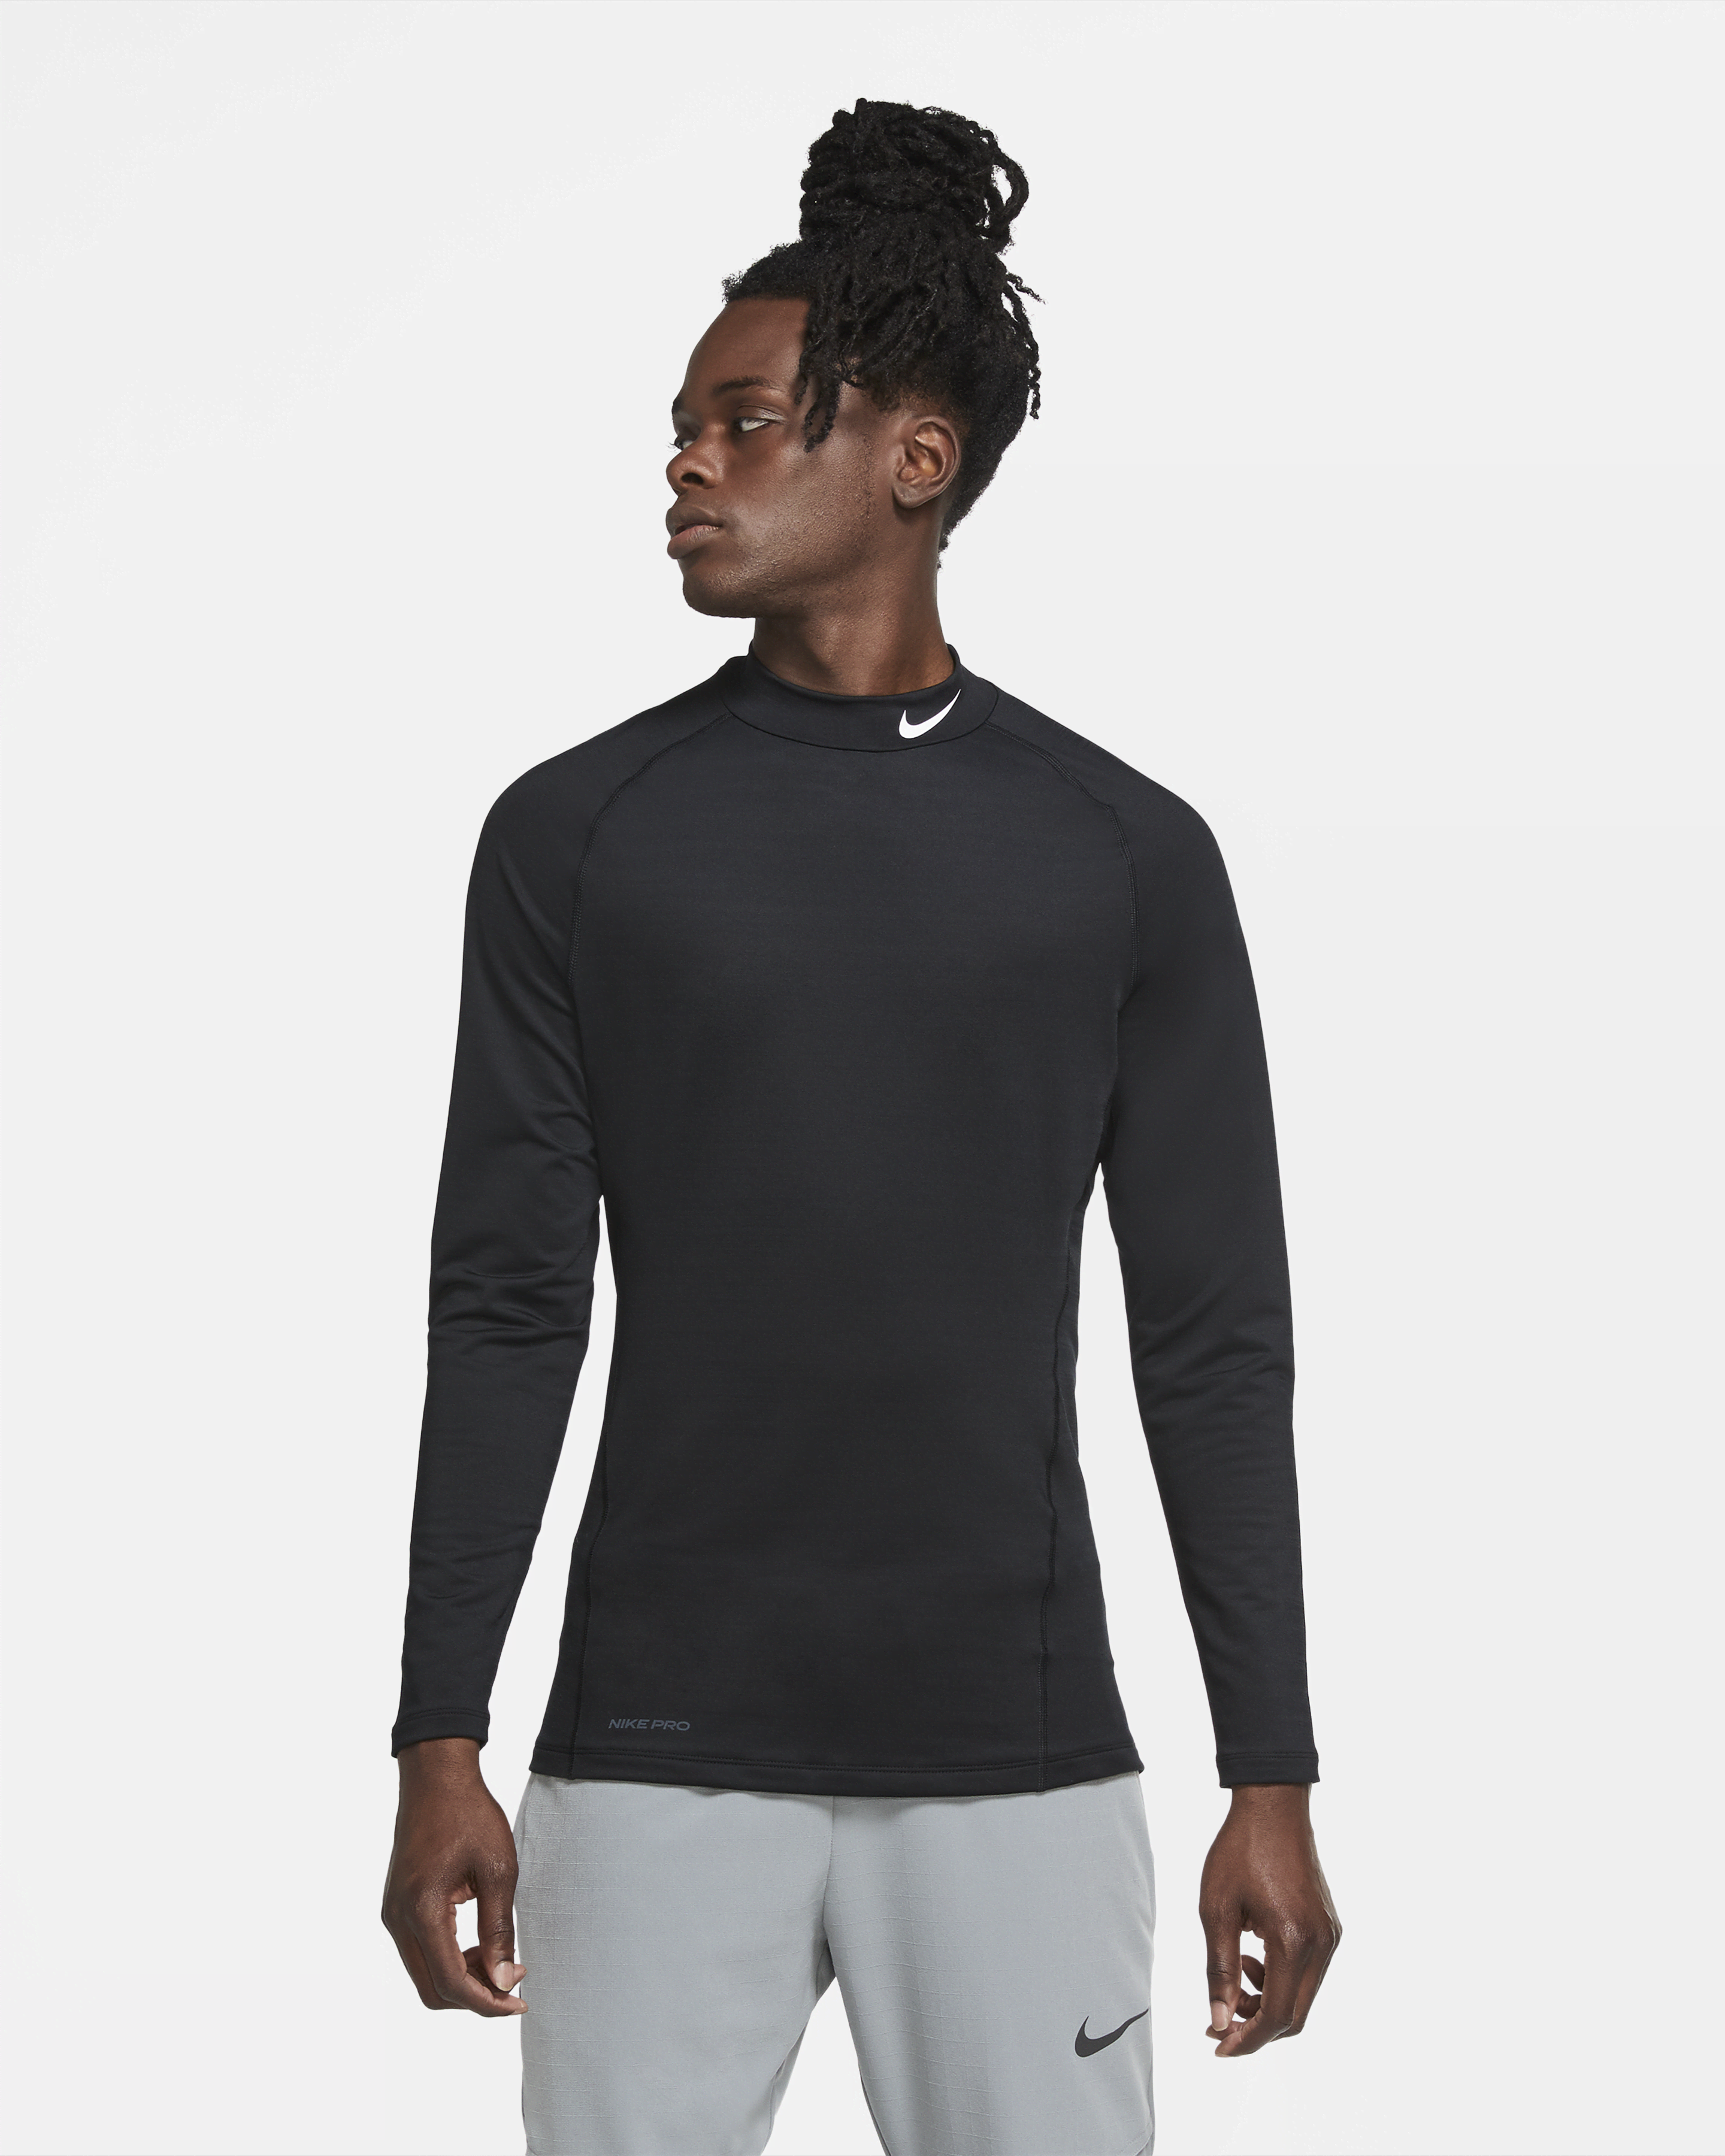 Men's Long Sleeve T-Shirt Gym Baselayer Cool Dry Compression Top Mock Neck Solid 